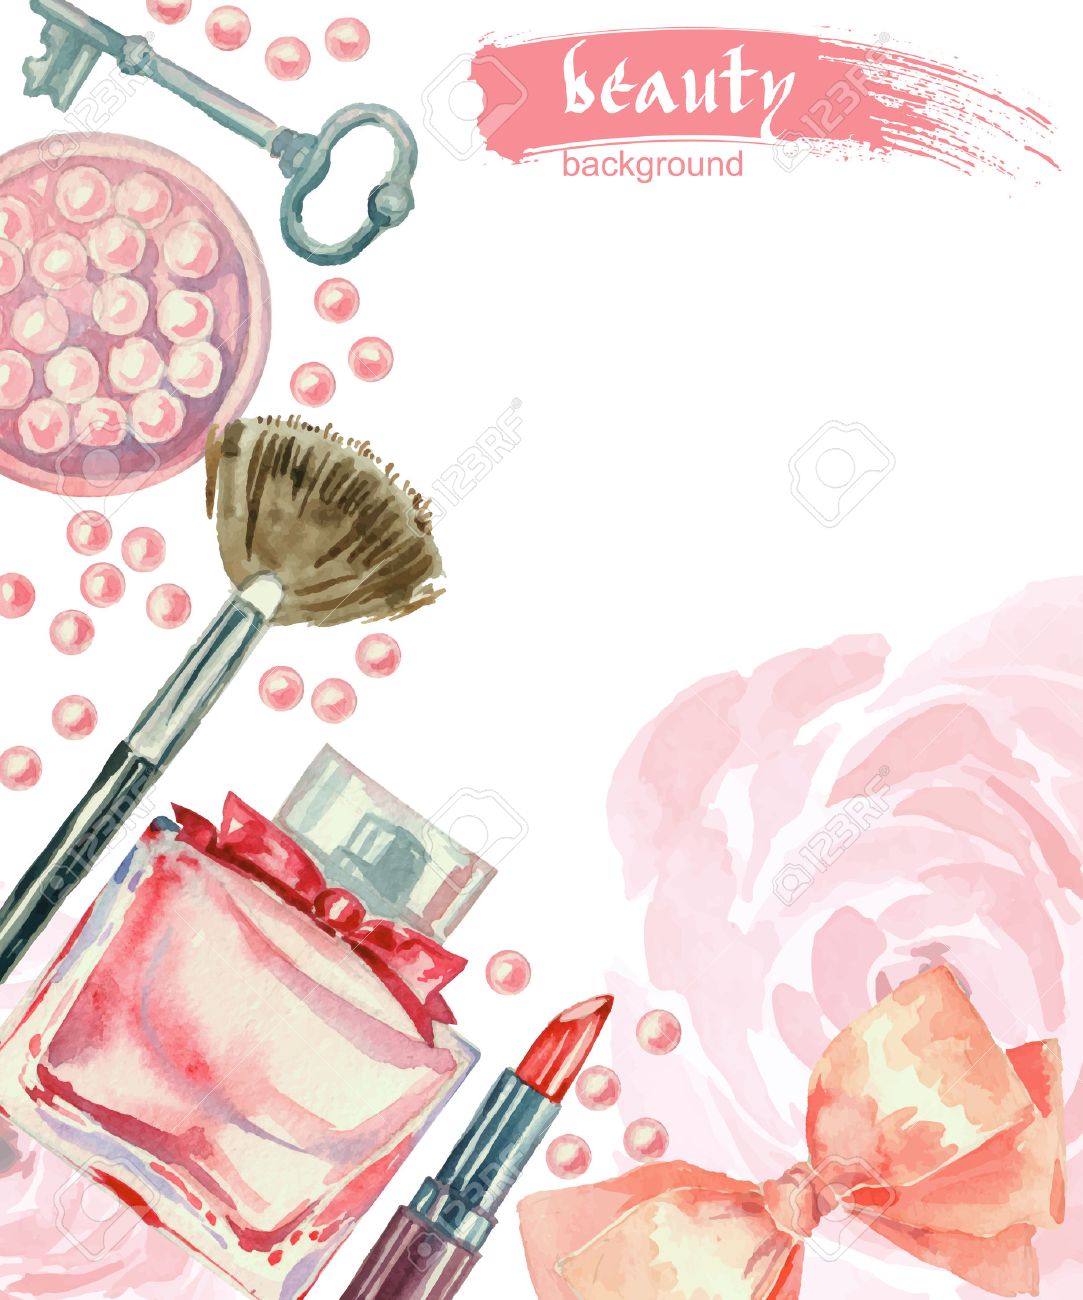 Watercolor Fashion And Cosmetics Background With Make Up Artist